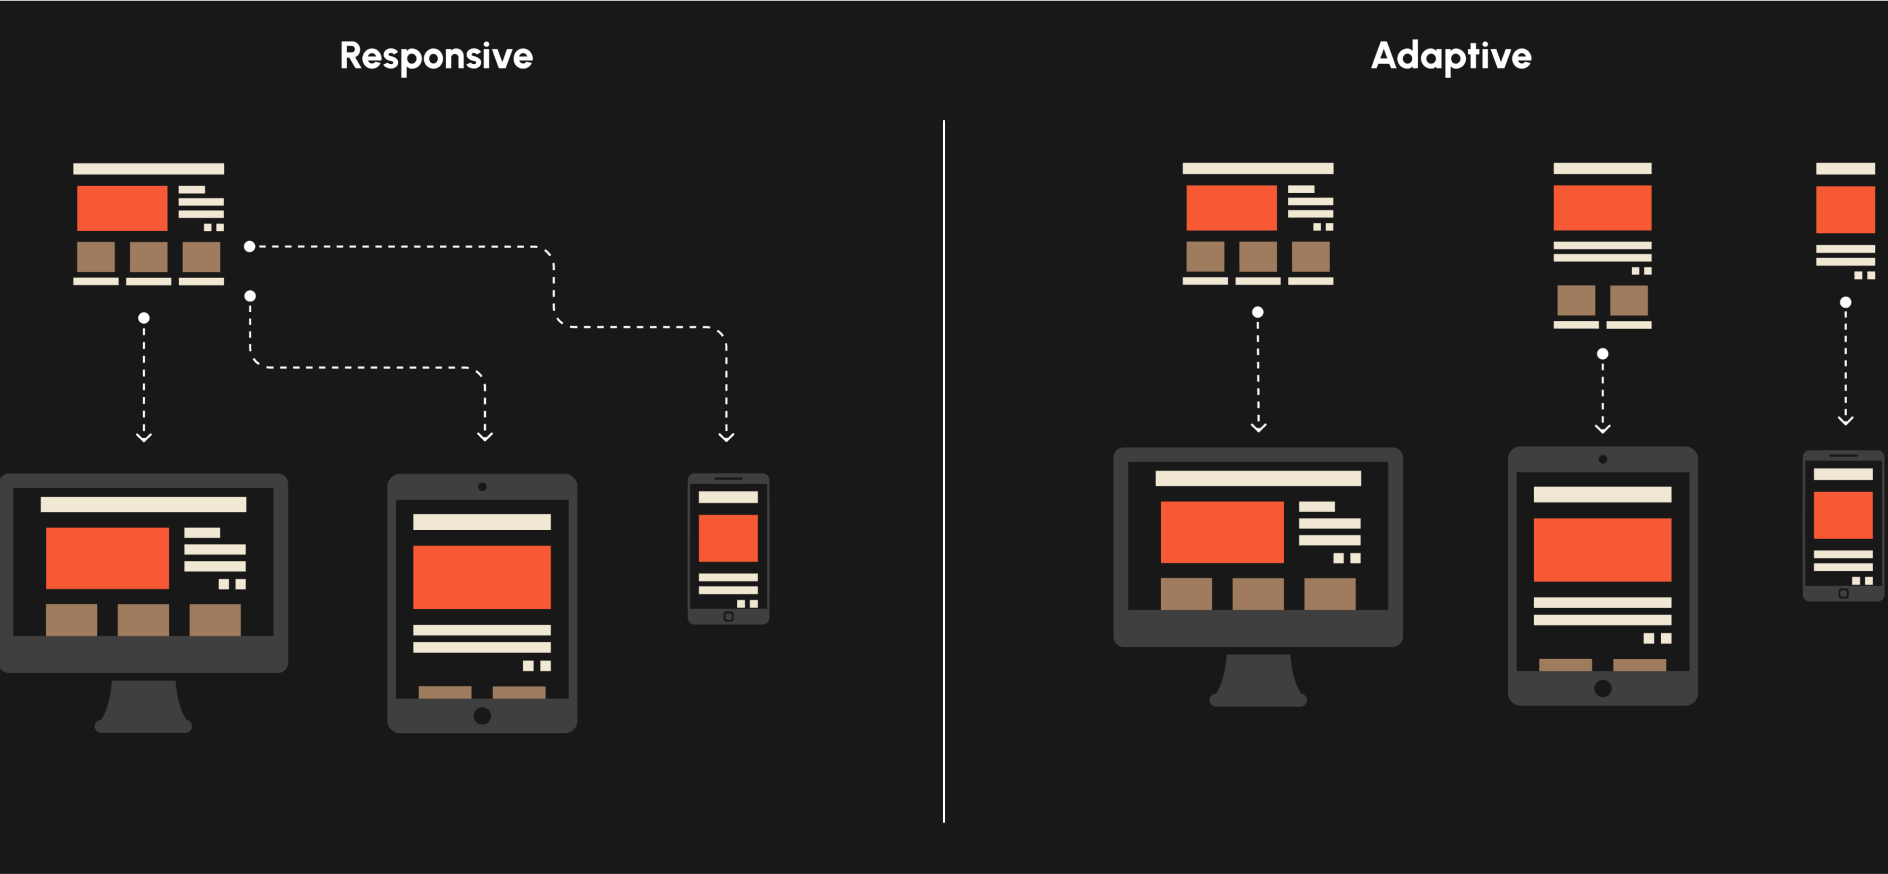 Responsive vs. Adaptive Design: What's the Difference?